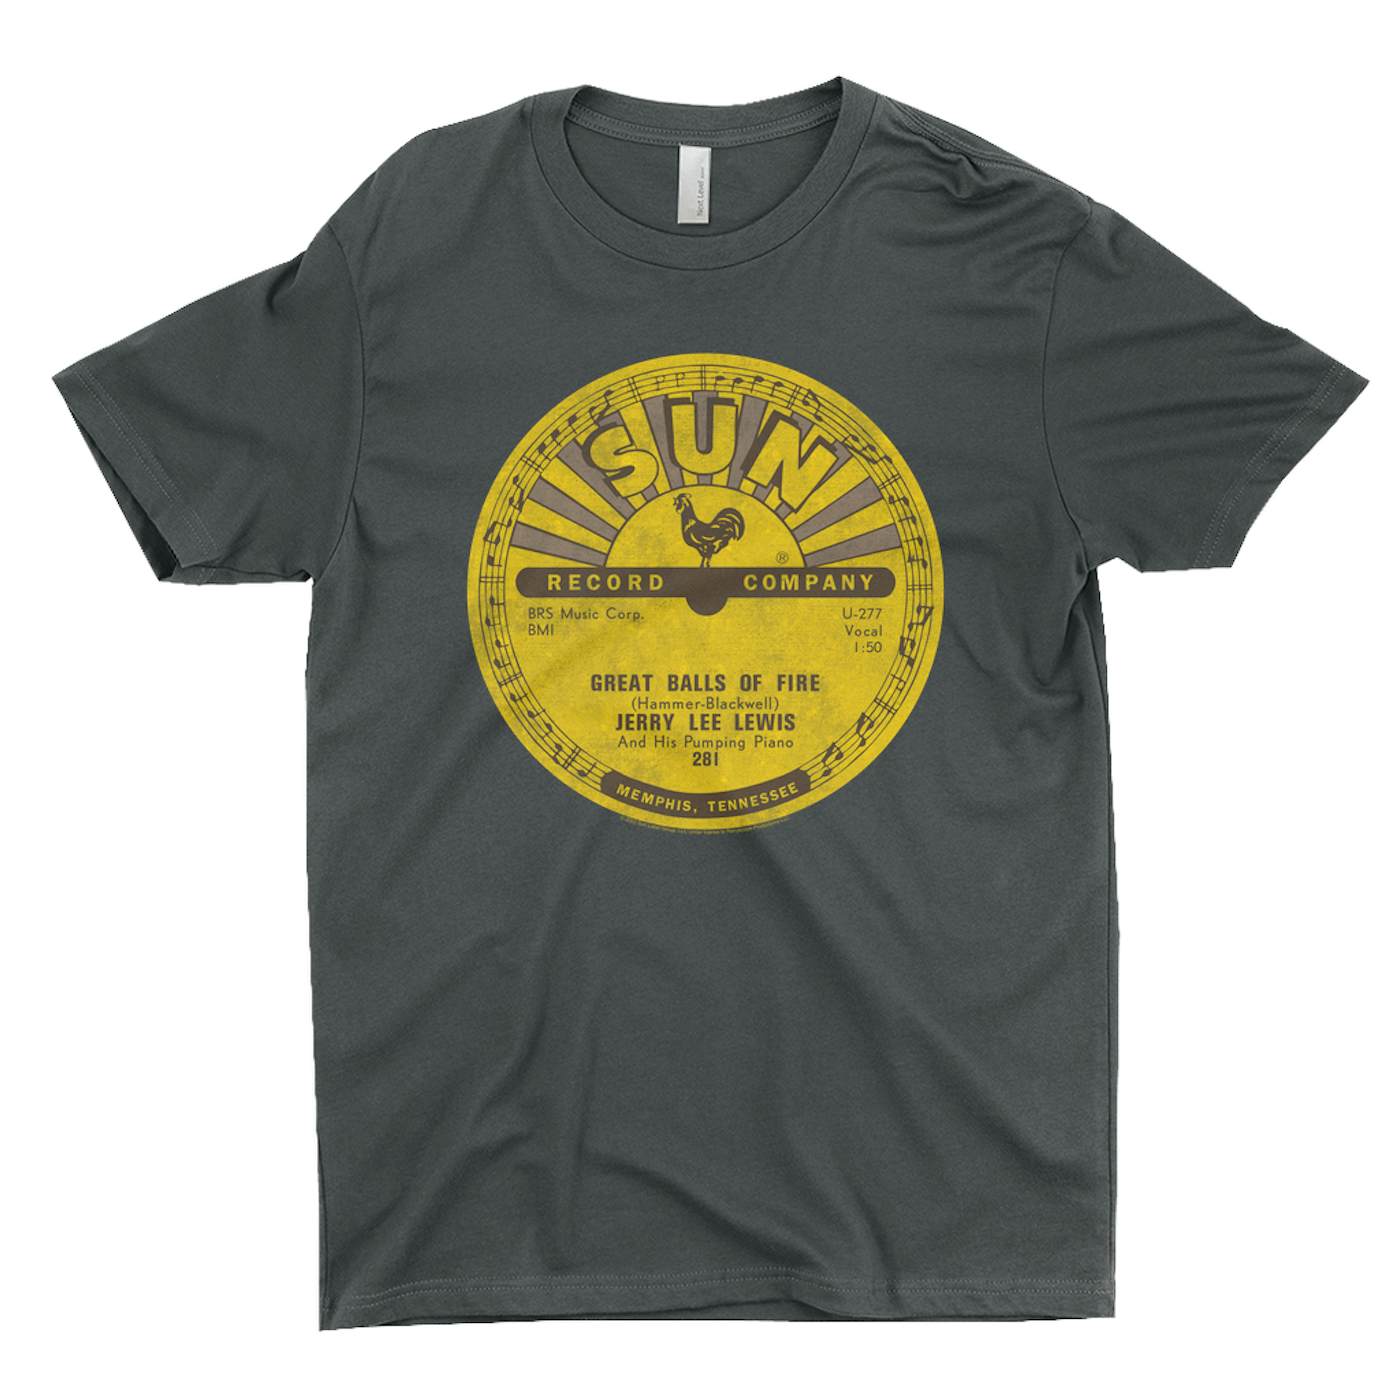 Jerry Lee Lewis T-Shirt | Great Balls Of Fire Record Label Distressed Jerry Lee Lewis Shirt